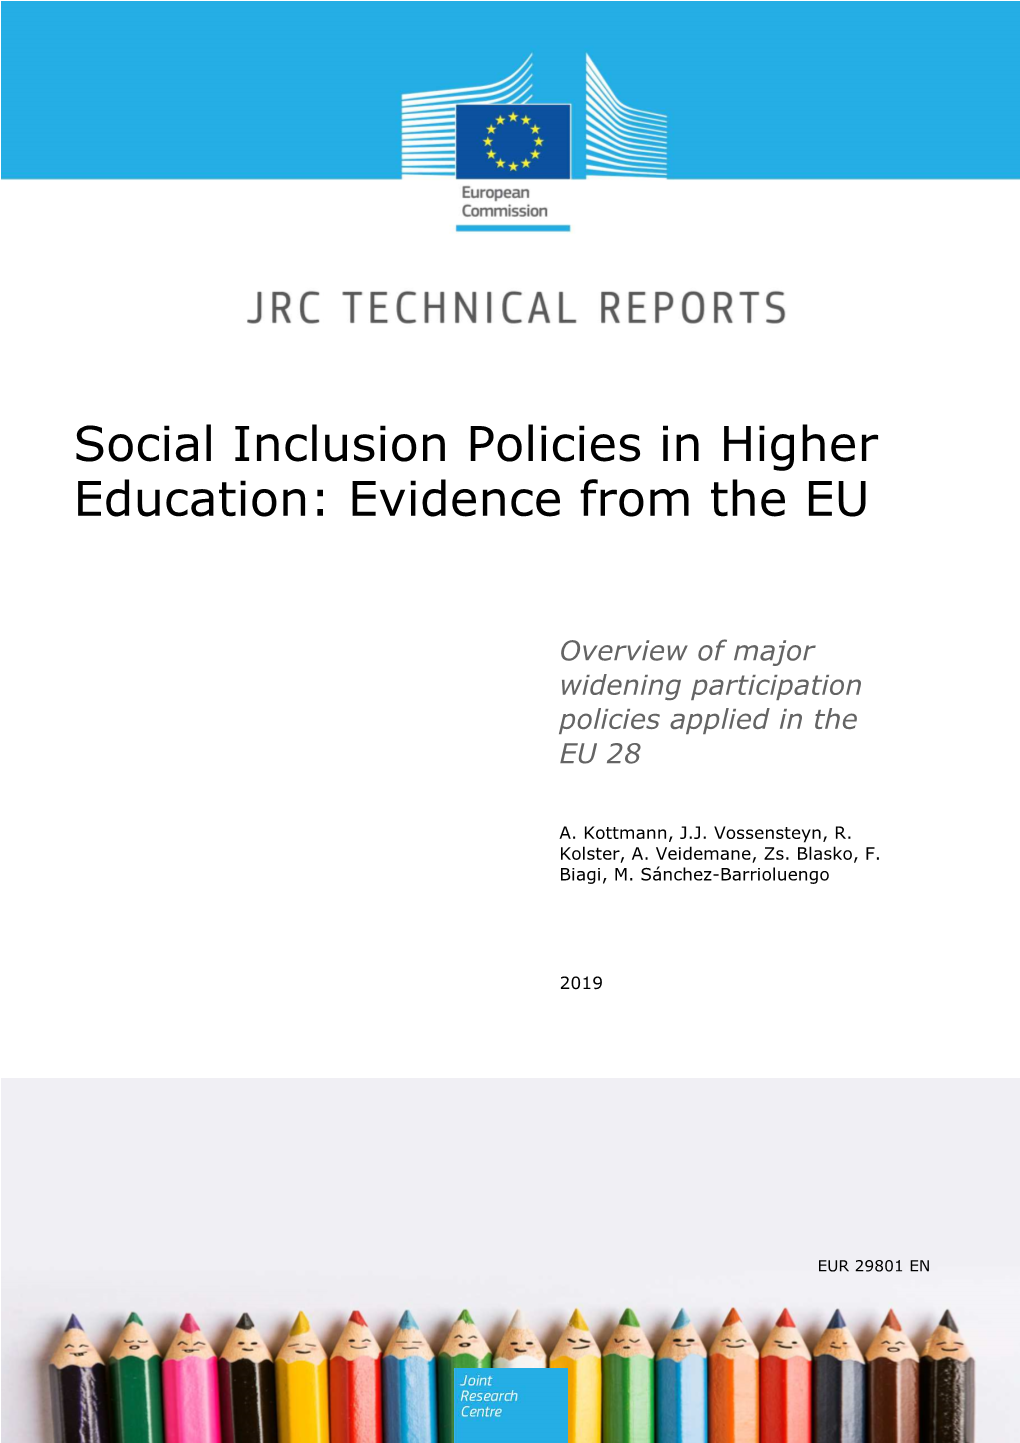 Social Inclusion Policies in Higher Education: Evidence from the EU